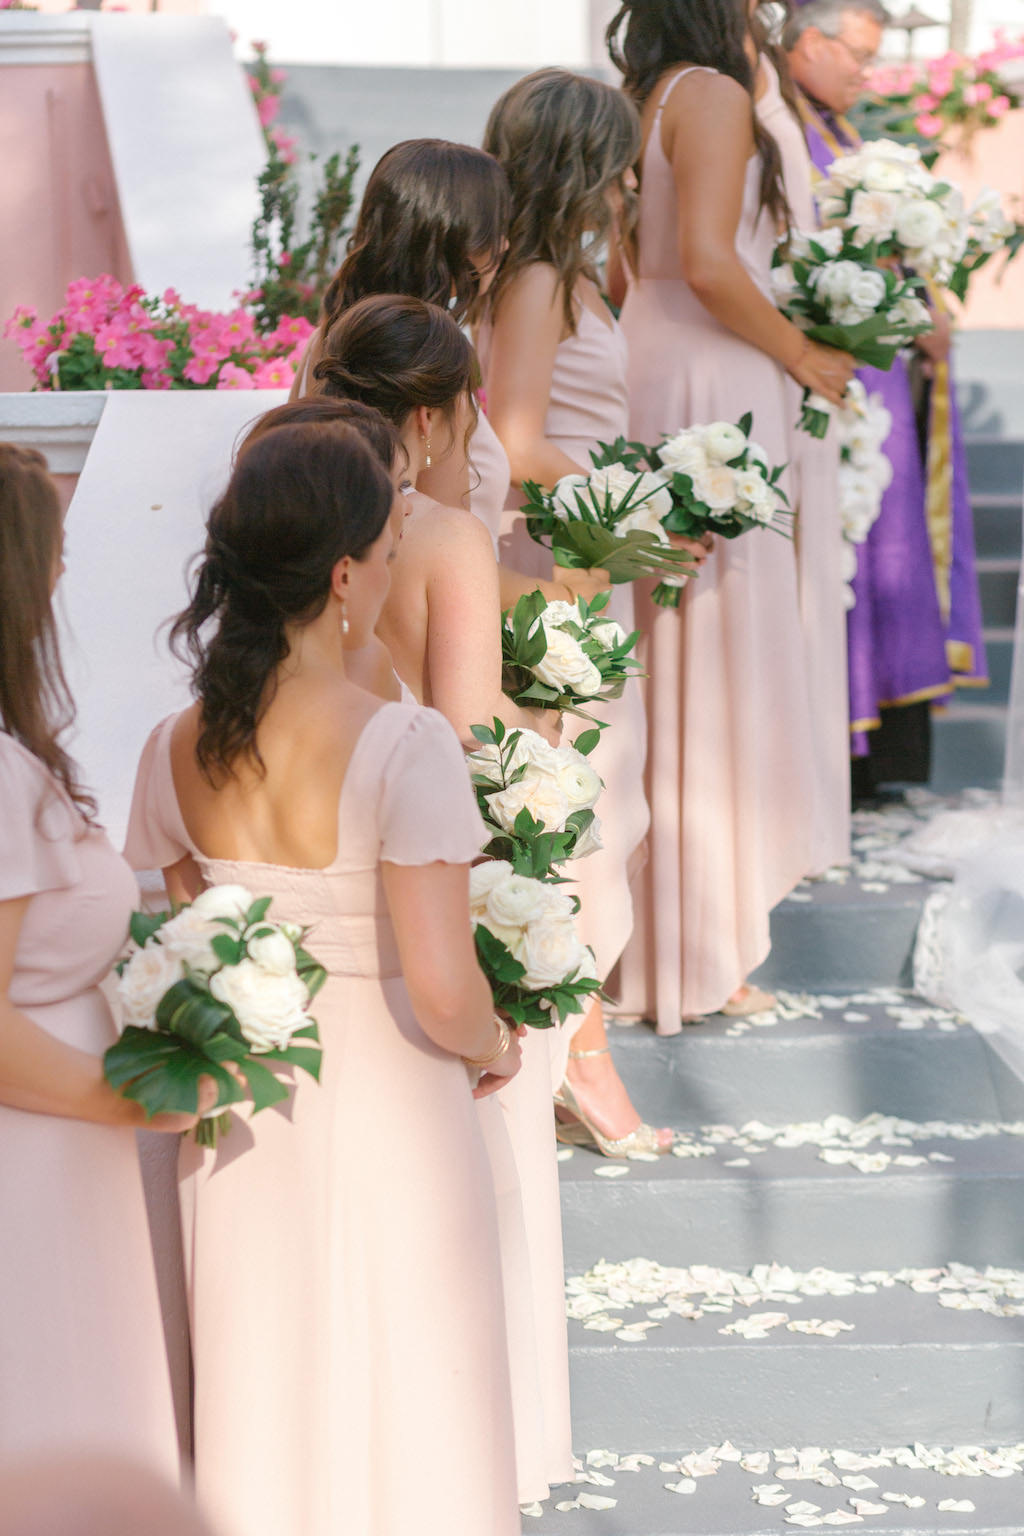 Florida Bridesmaids in Blush Pink Mix and Match Dresses Holding White Floral Bouquets | Tampa Bay Wedding Florist Bruce Wayne Florals